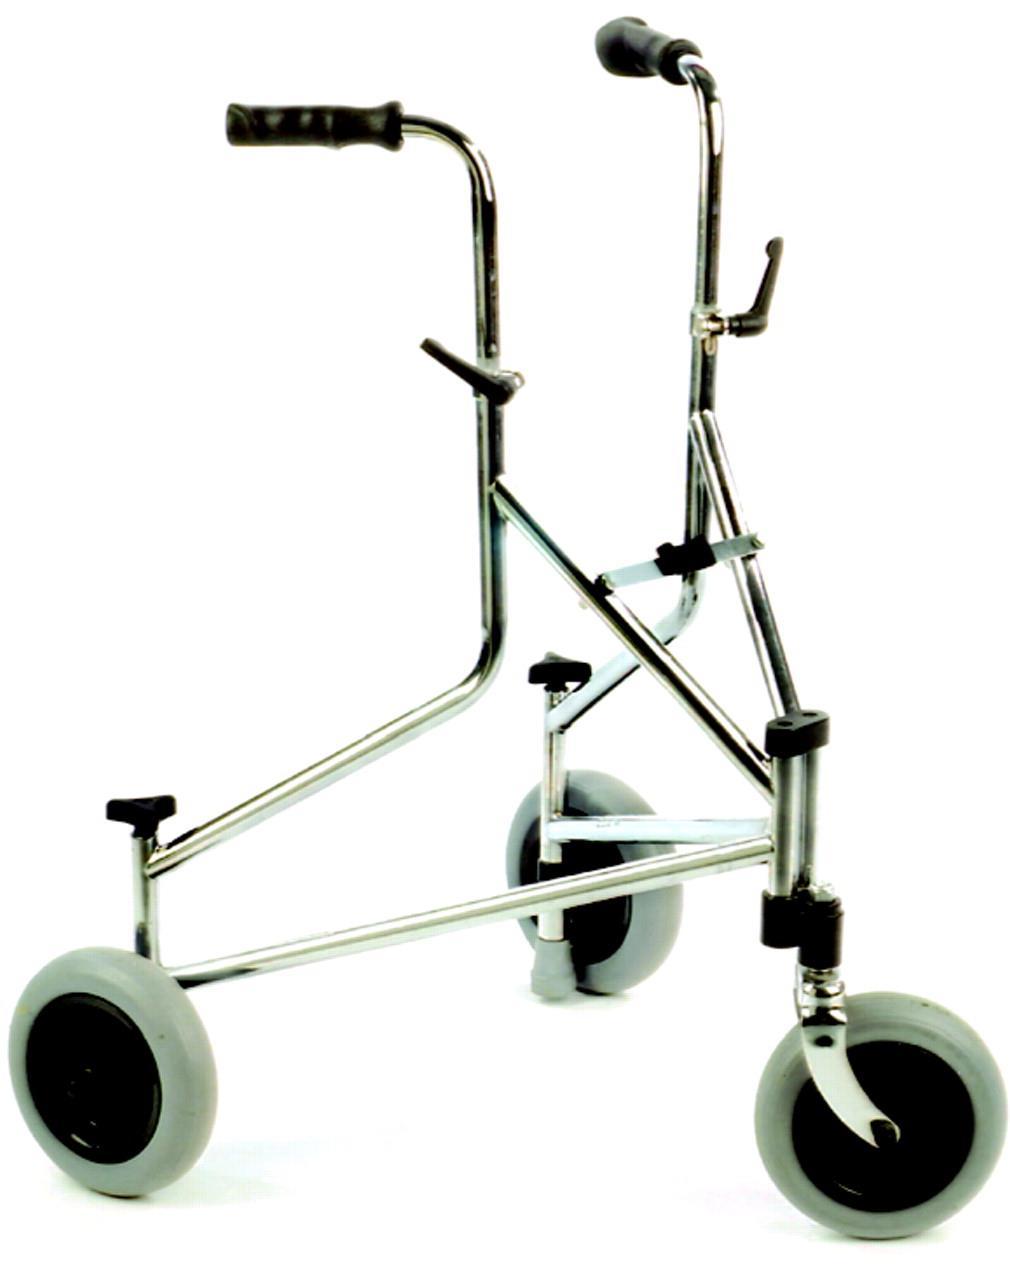 DELTA FRAME / 3 WHEELED WALKER Can be used for transfers and/or mobilising in the ways described below: Independently by the patient. With supervision of one person.